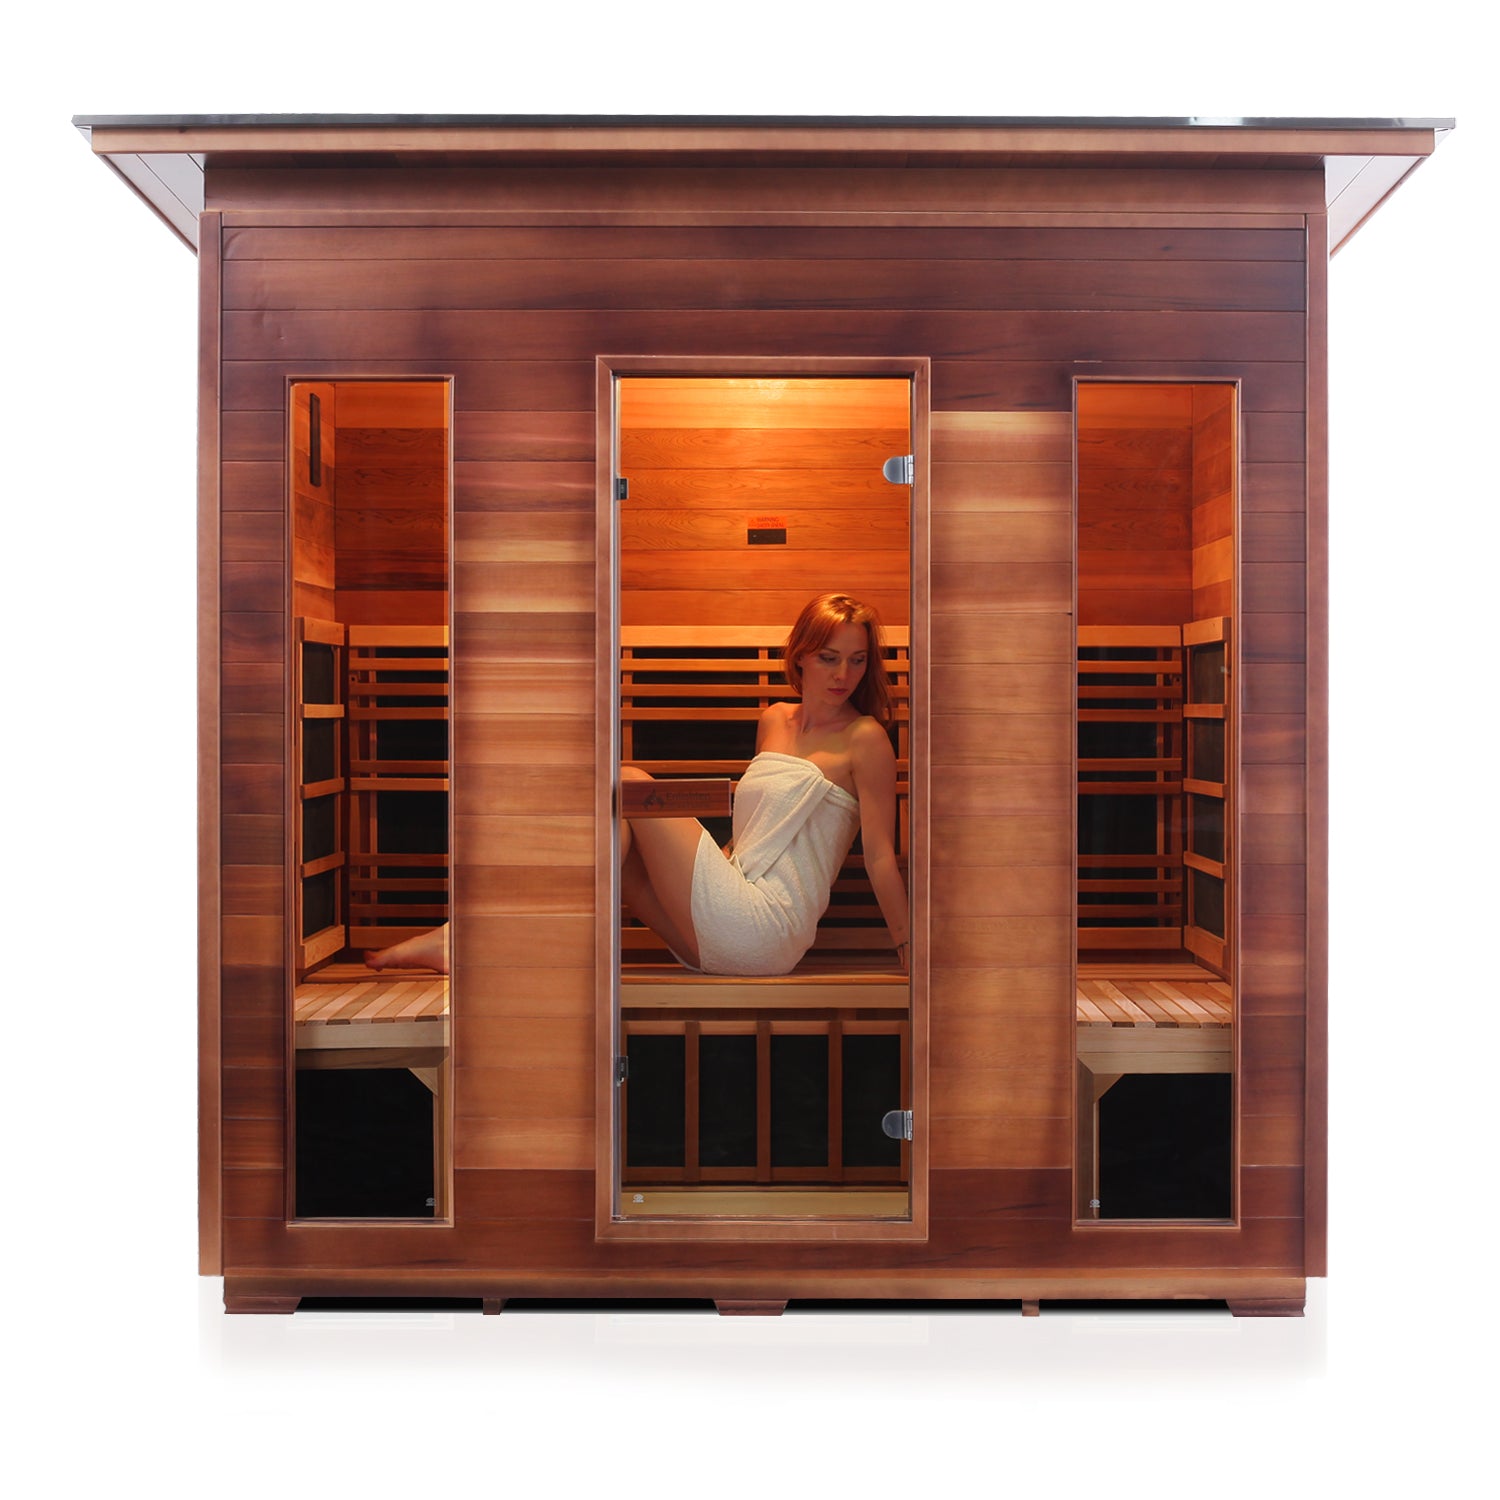 Enlighten Sauna Rustic 5 Person Slope Roof front facing view with white background and woman inside